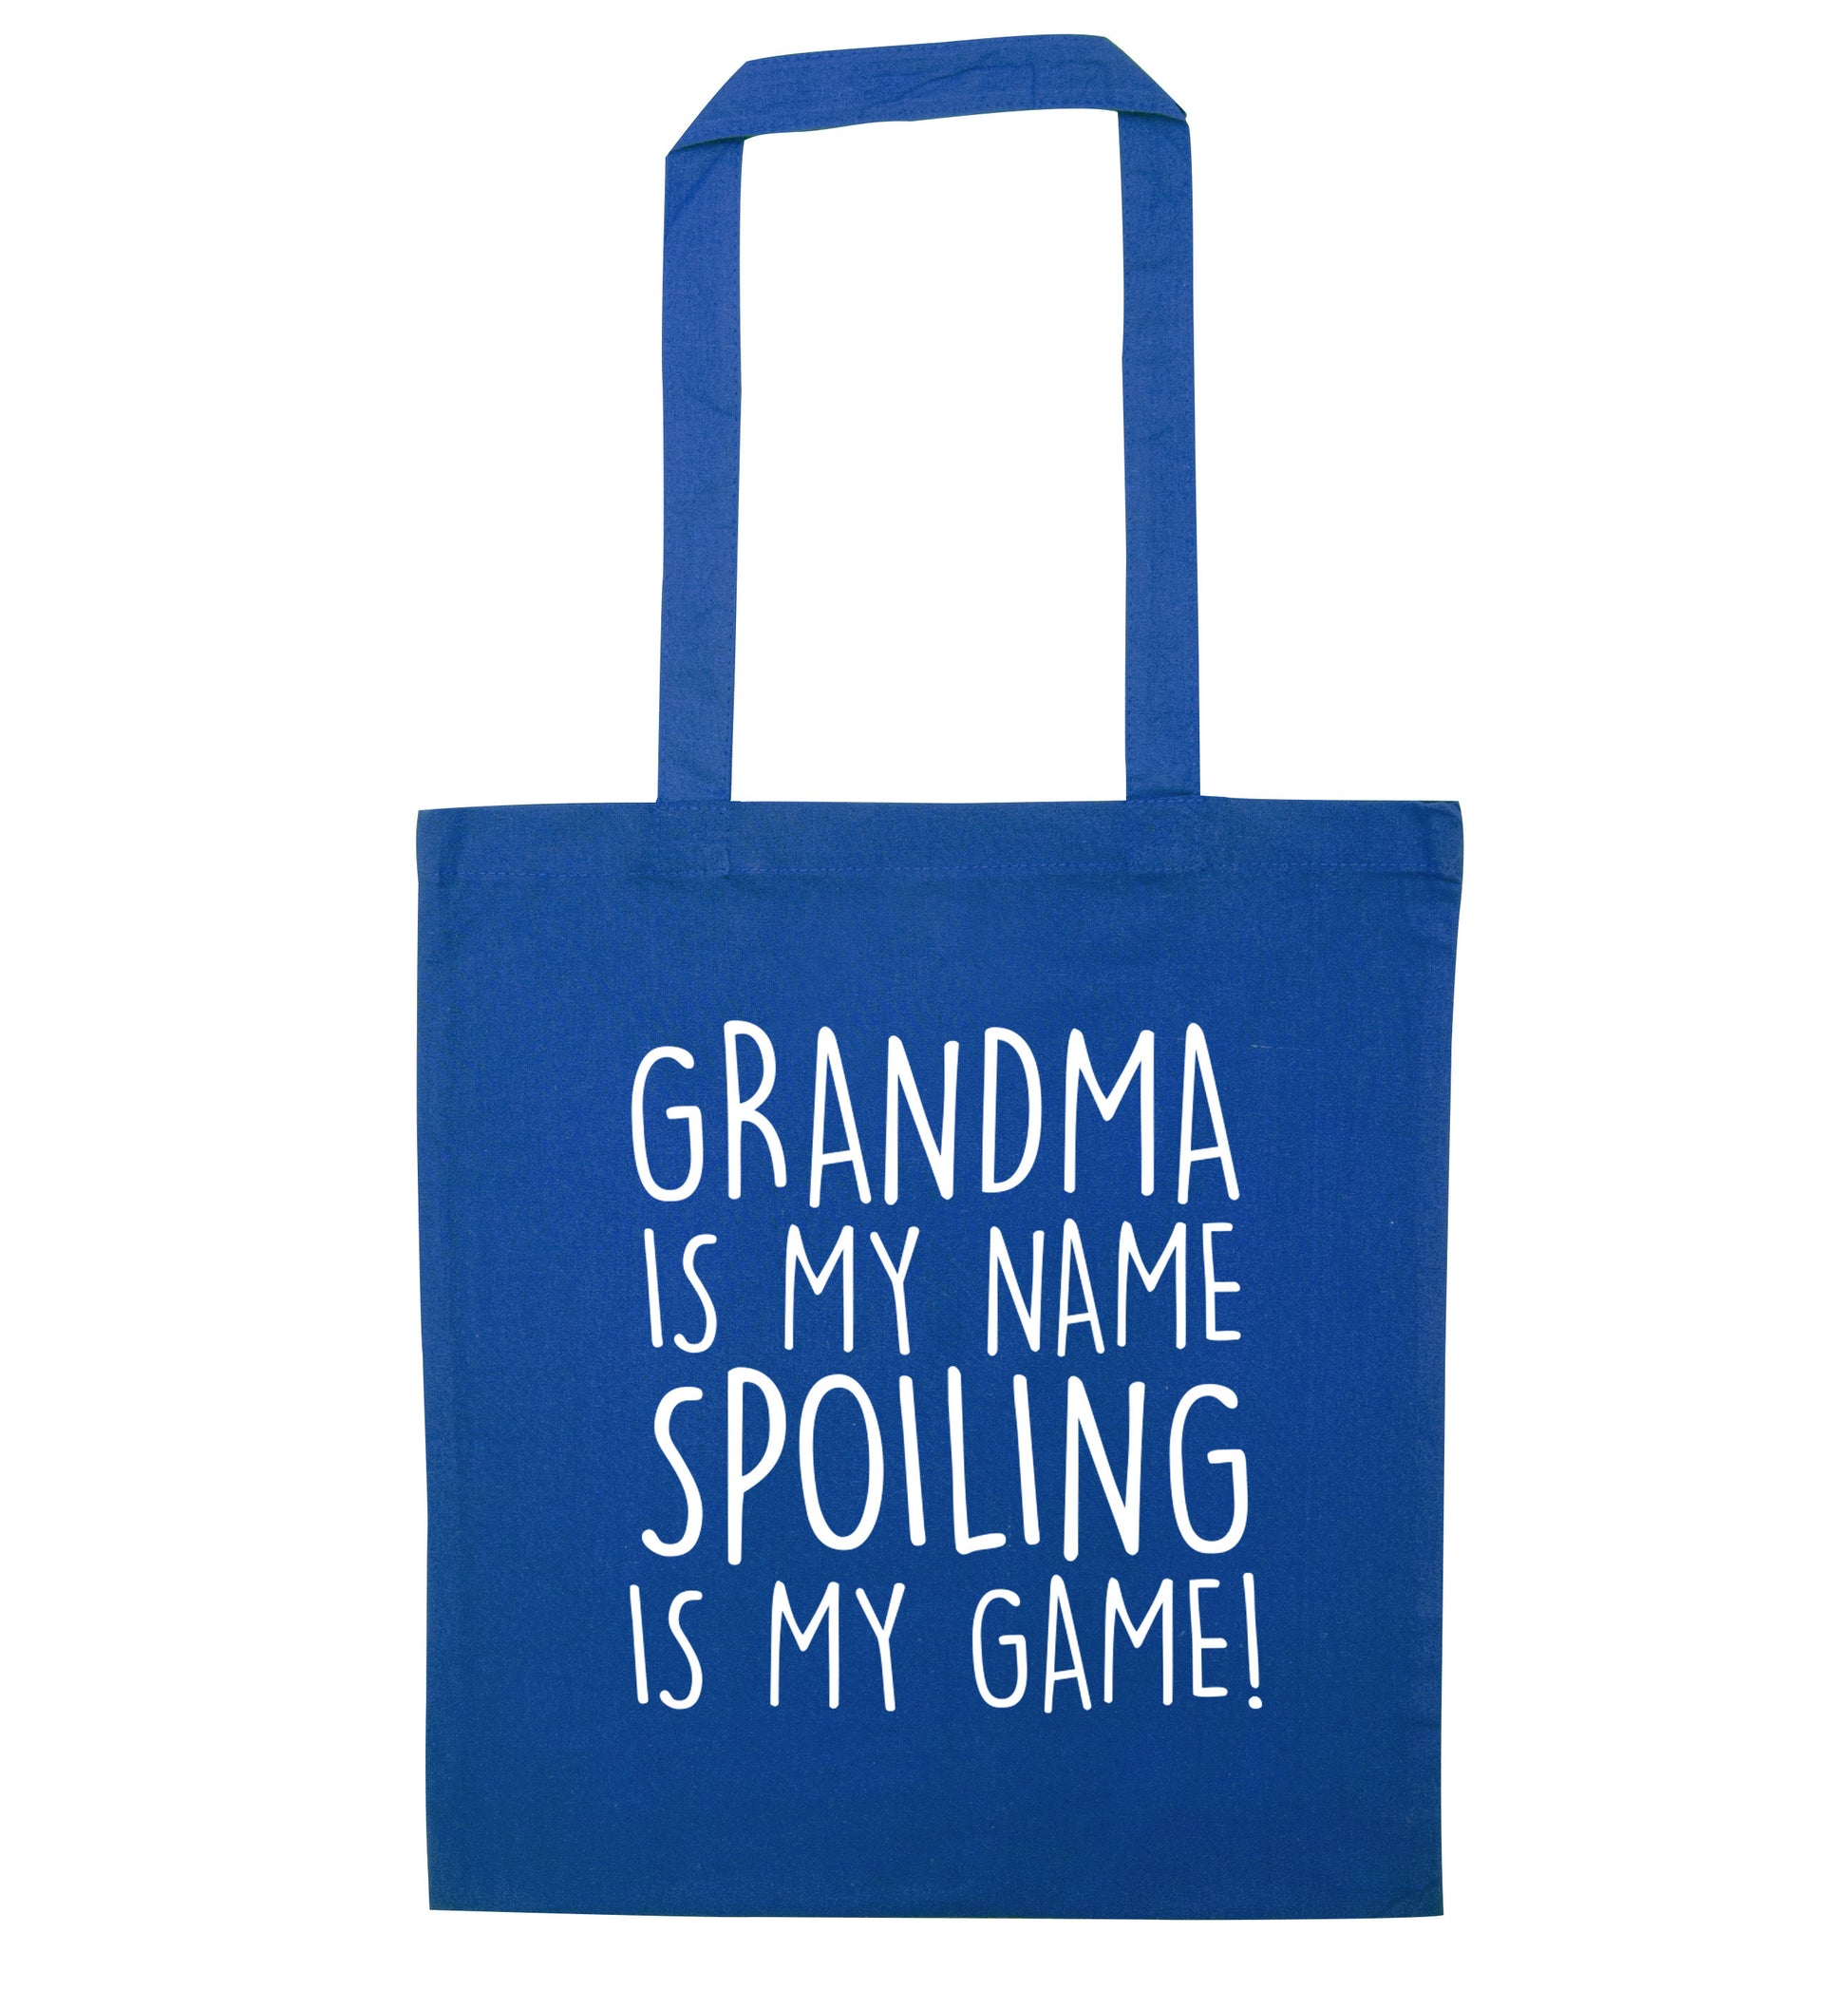 Grandma is my name, spoiling is my game blue tote bag